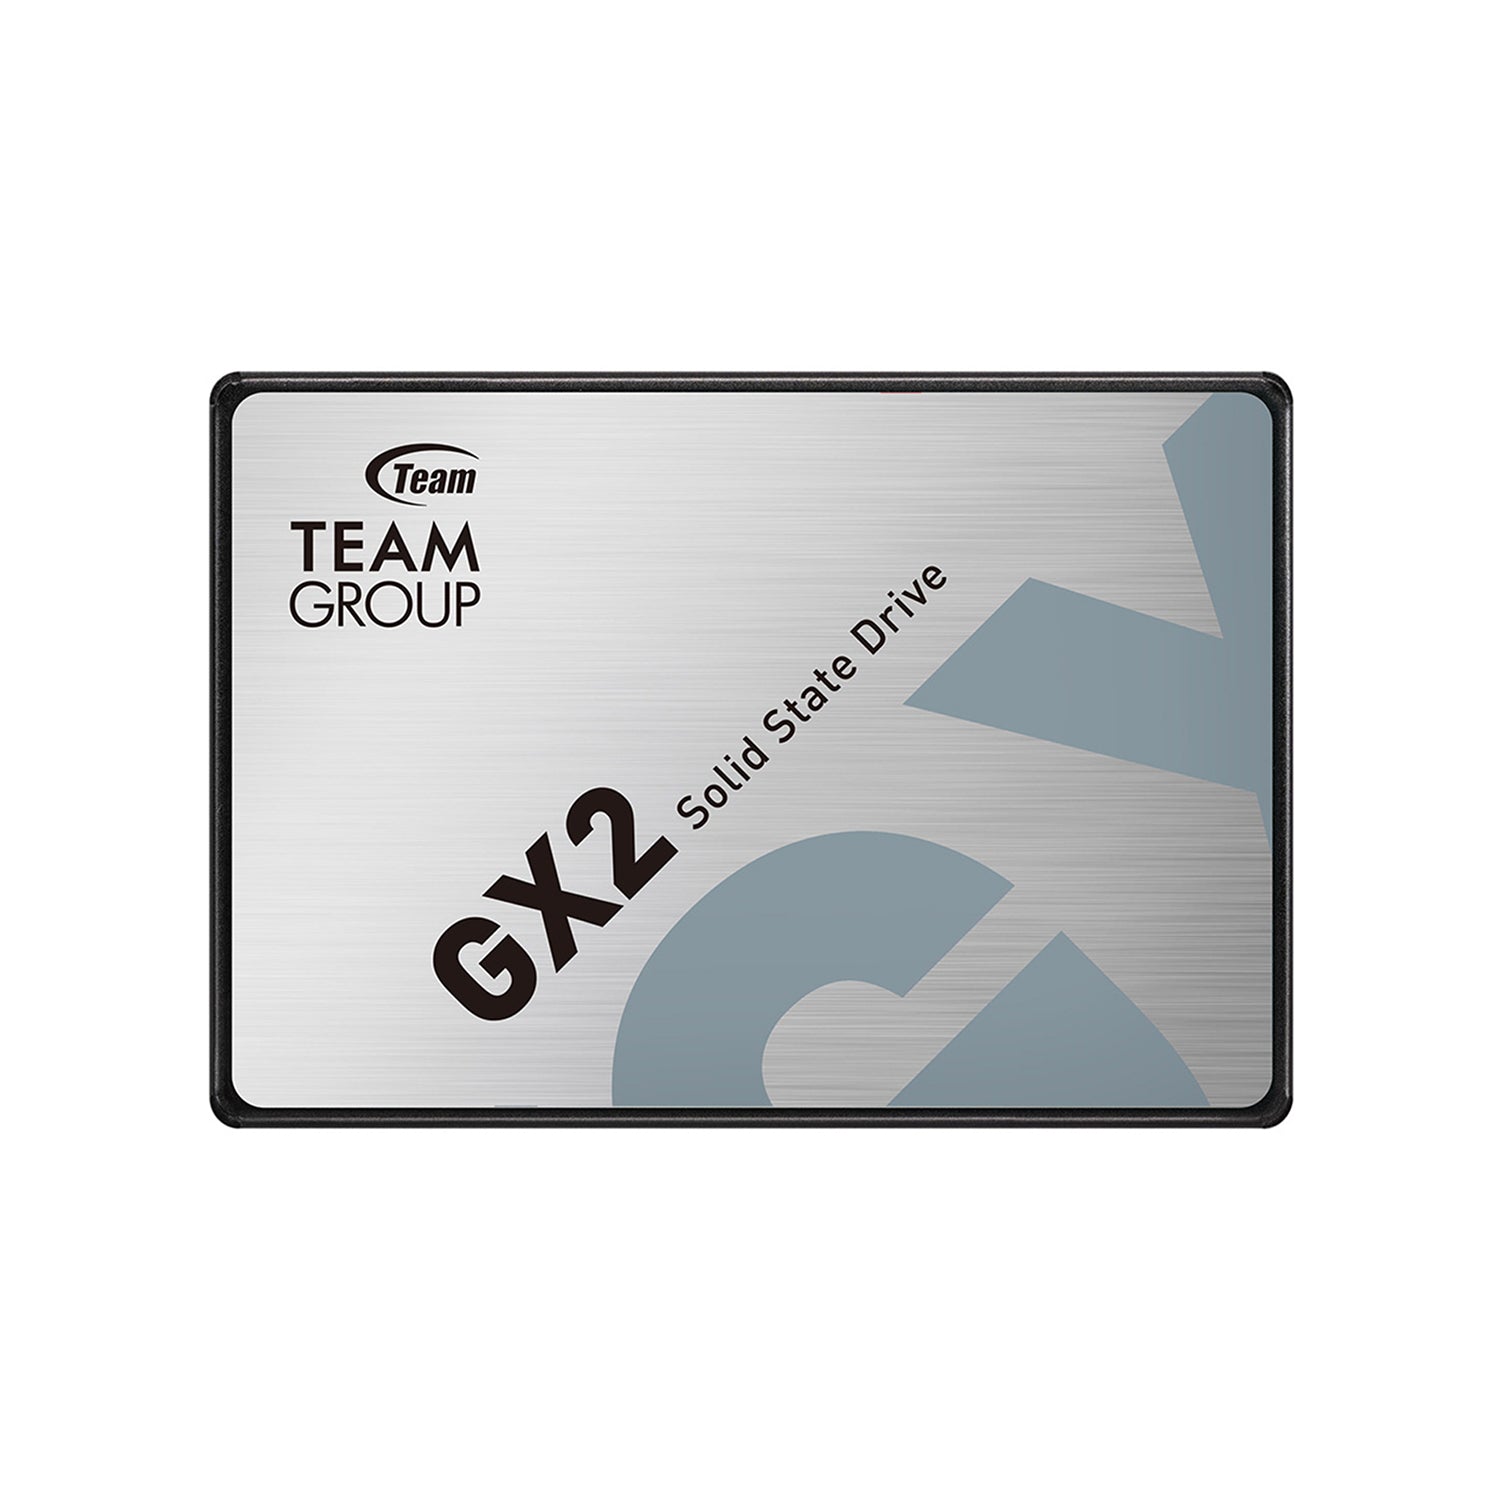 TEAMGROUP GX2 512GB Internal SSD with Graphene Heat Dissipation Solution | SATA III 6Gb/s Interface | 2.5 Inch Form Factor for Laptop, Desktop PC (T253X2512G0C101)